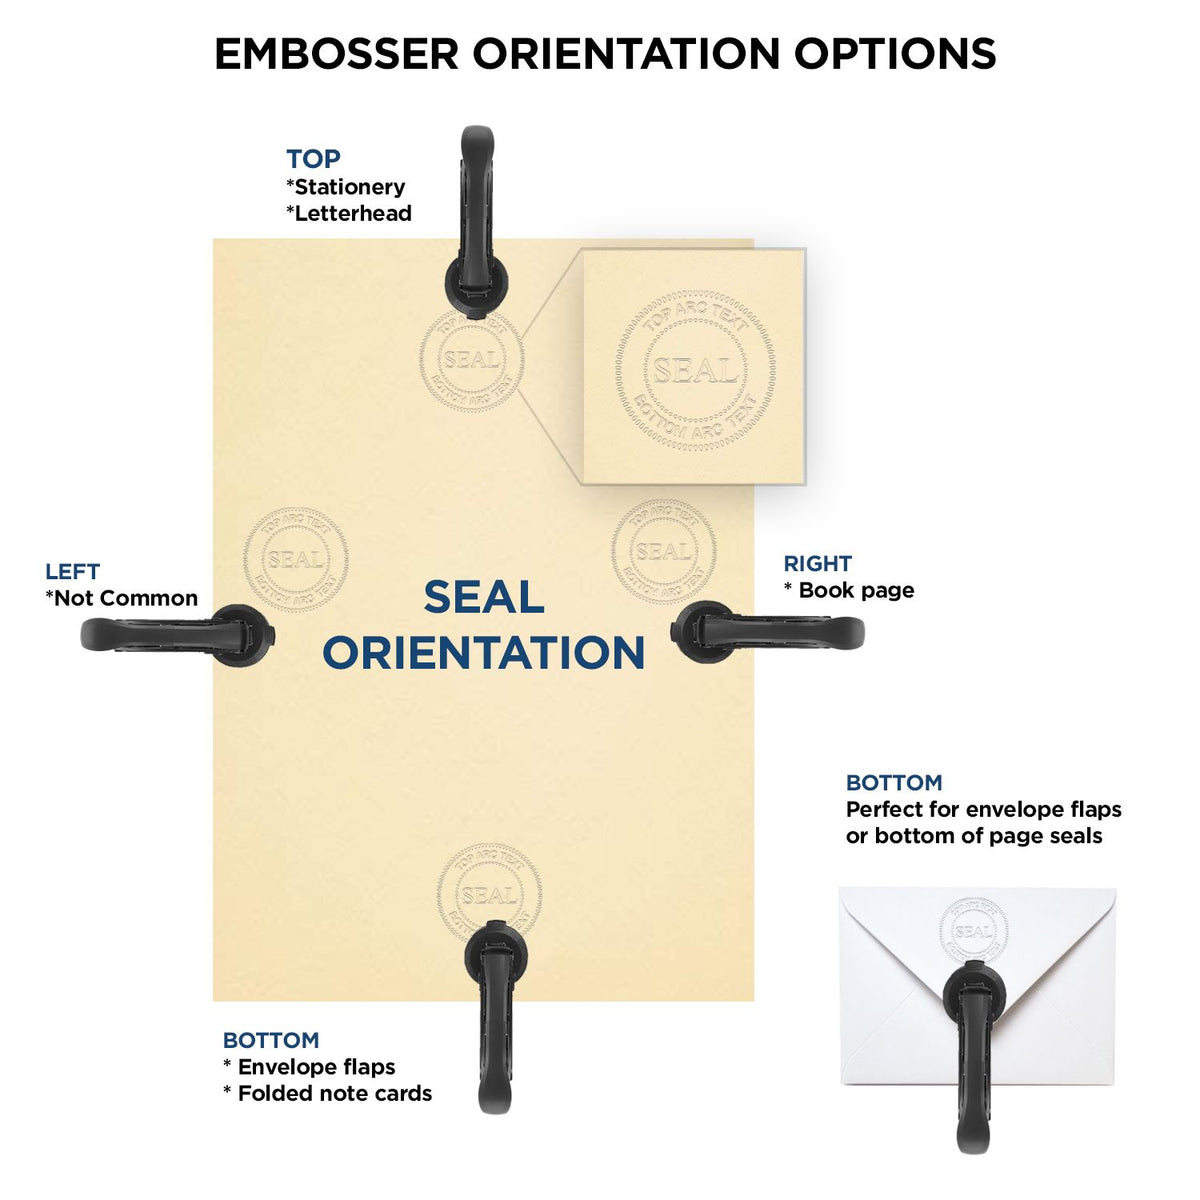 An infographic for the Handheld Alaska Architect Seal Embosser showing embosser orientation, this is showing examples of a top, bottom, right and left insert.